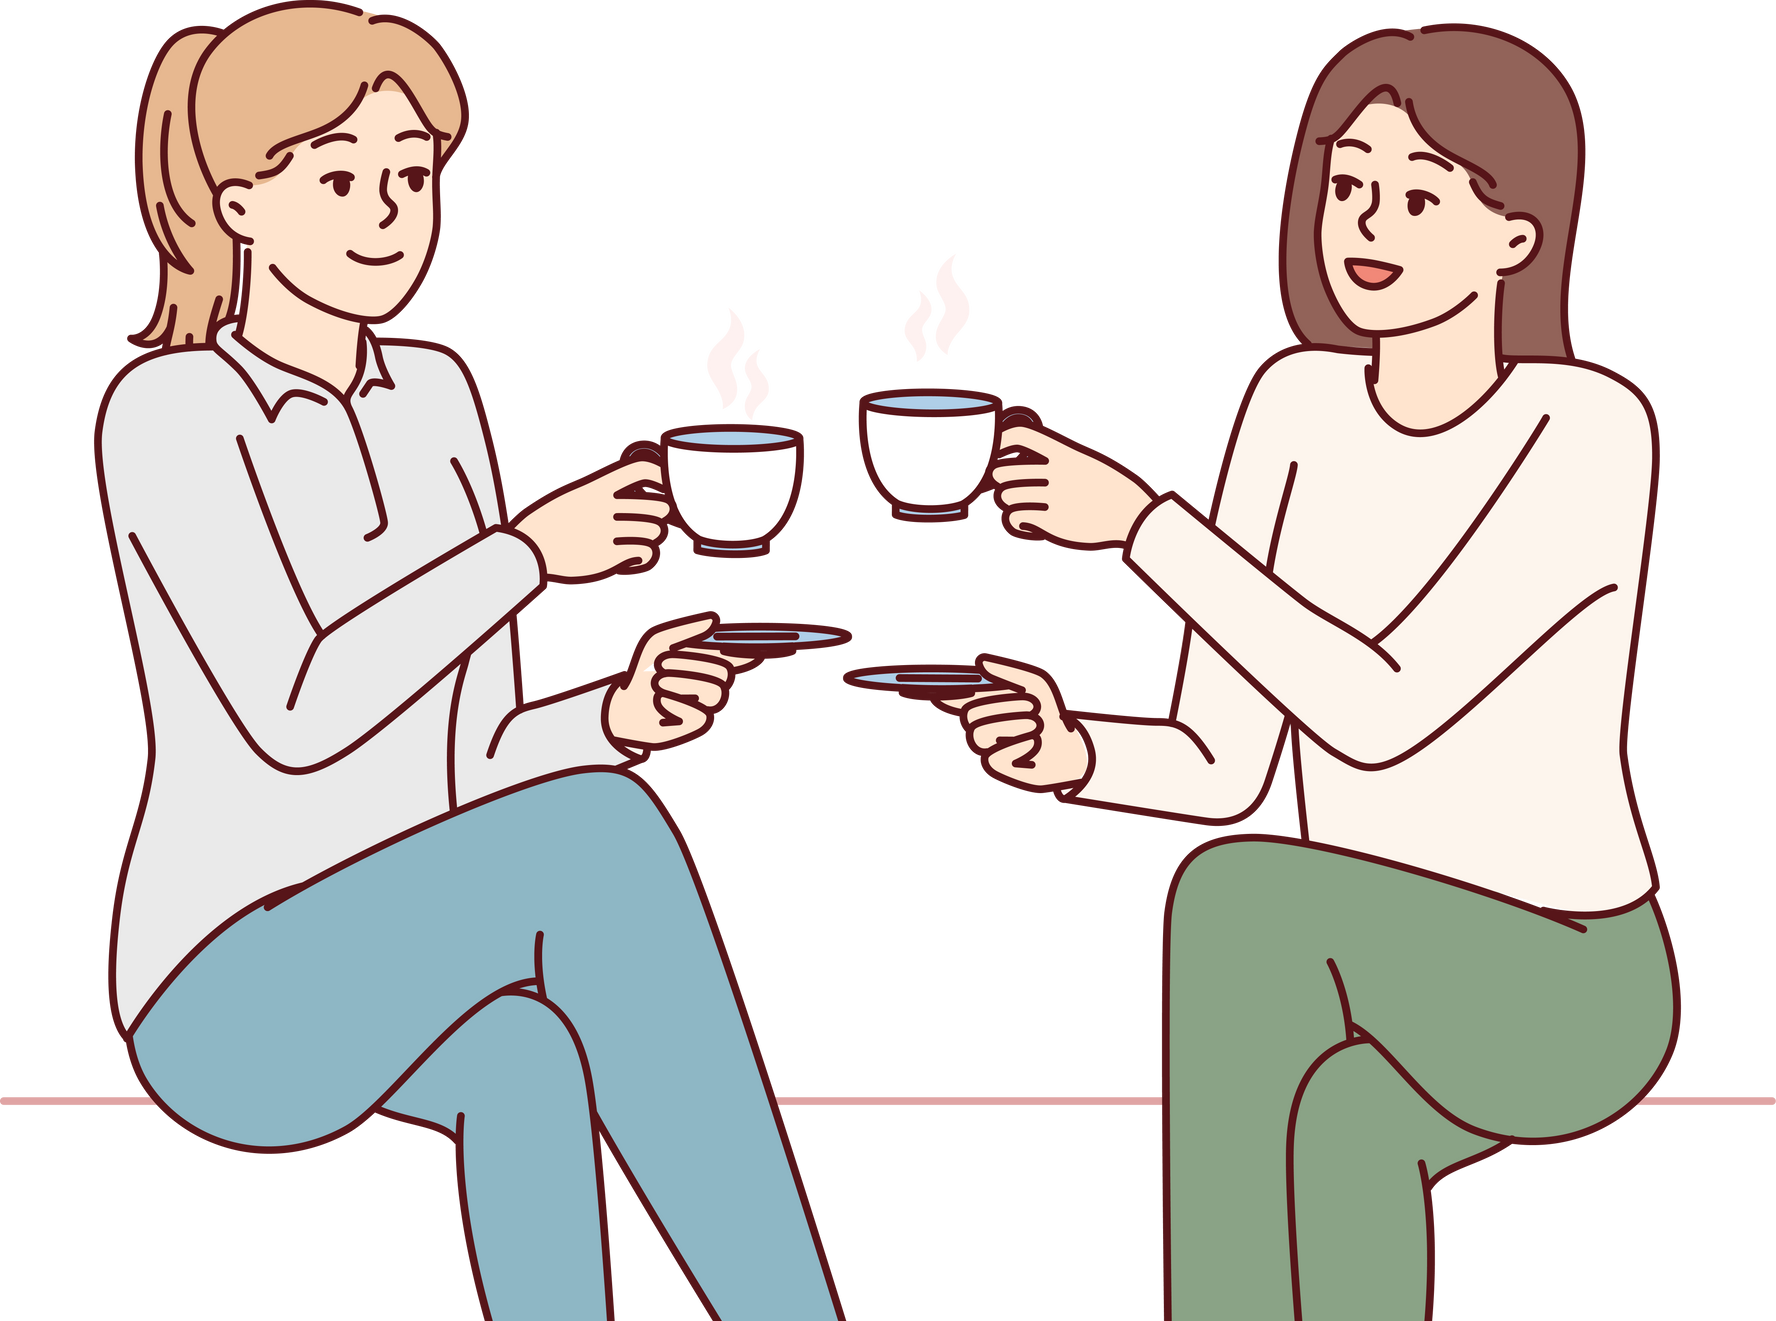 Two Girl Friends Drink Hot Coffee Holding Cups and Saucers Enjoy Joint Coffeebreak. Vector Image